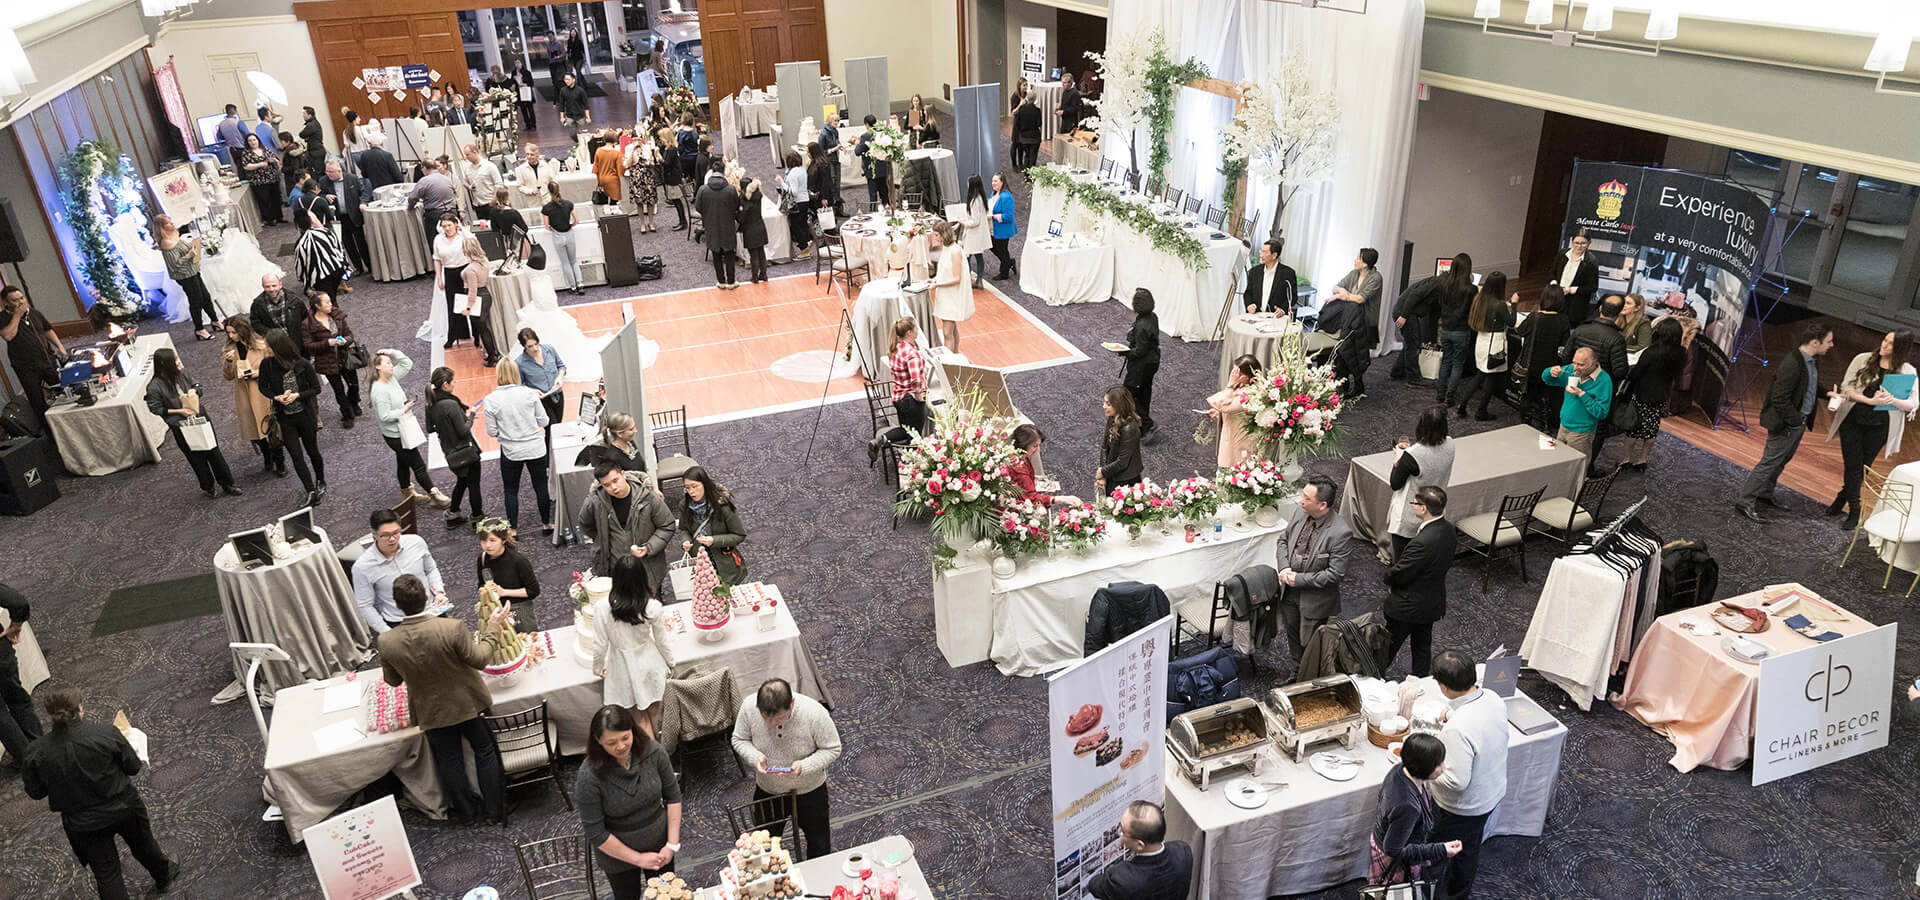 Hero image for The 2019 Wedding Show at Angus Glen Golf Club